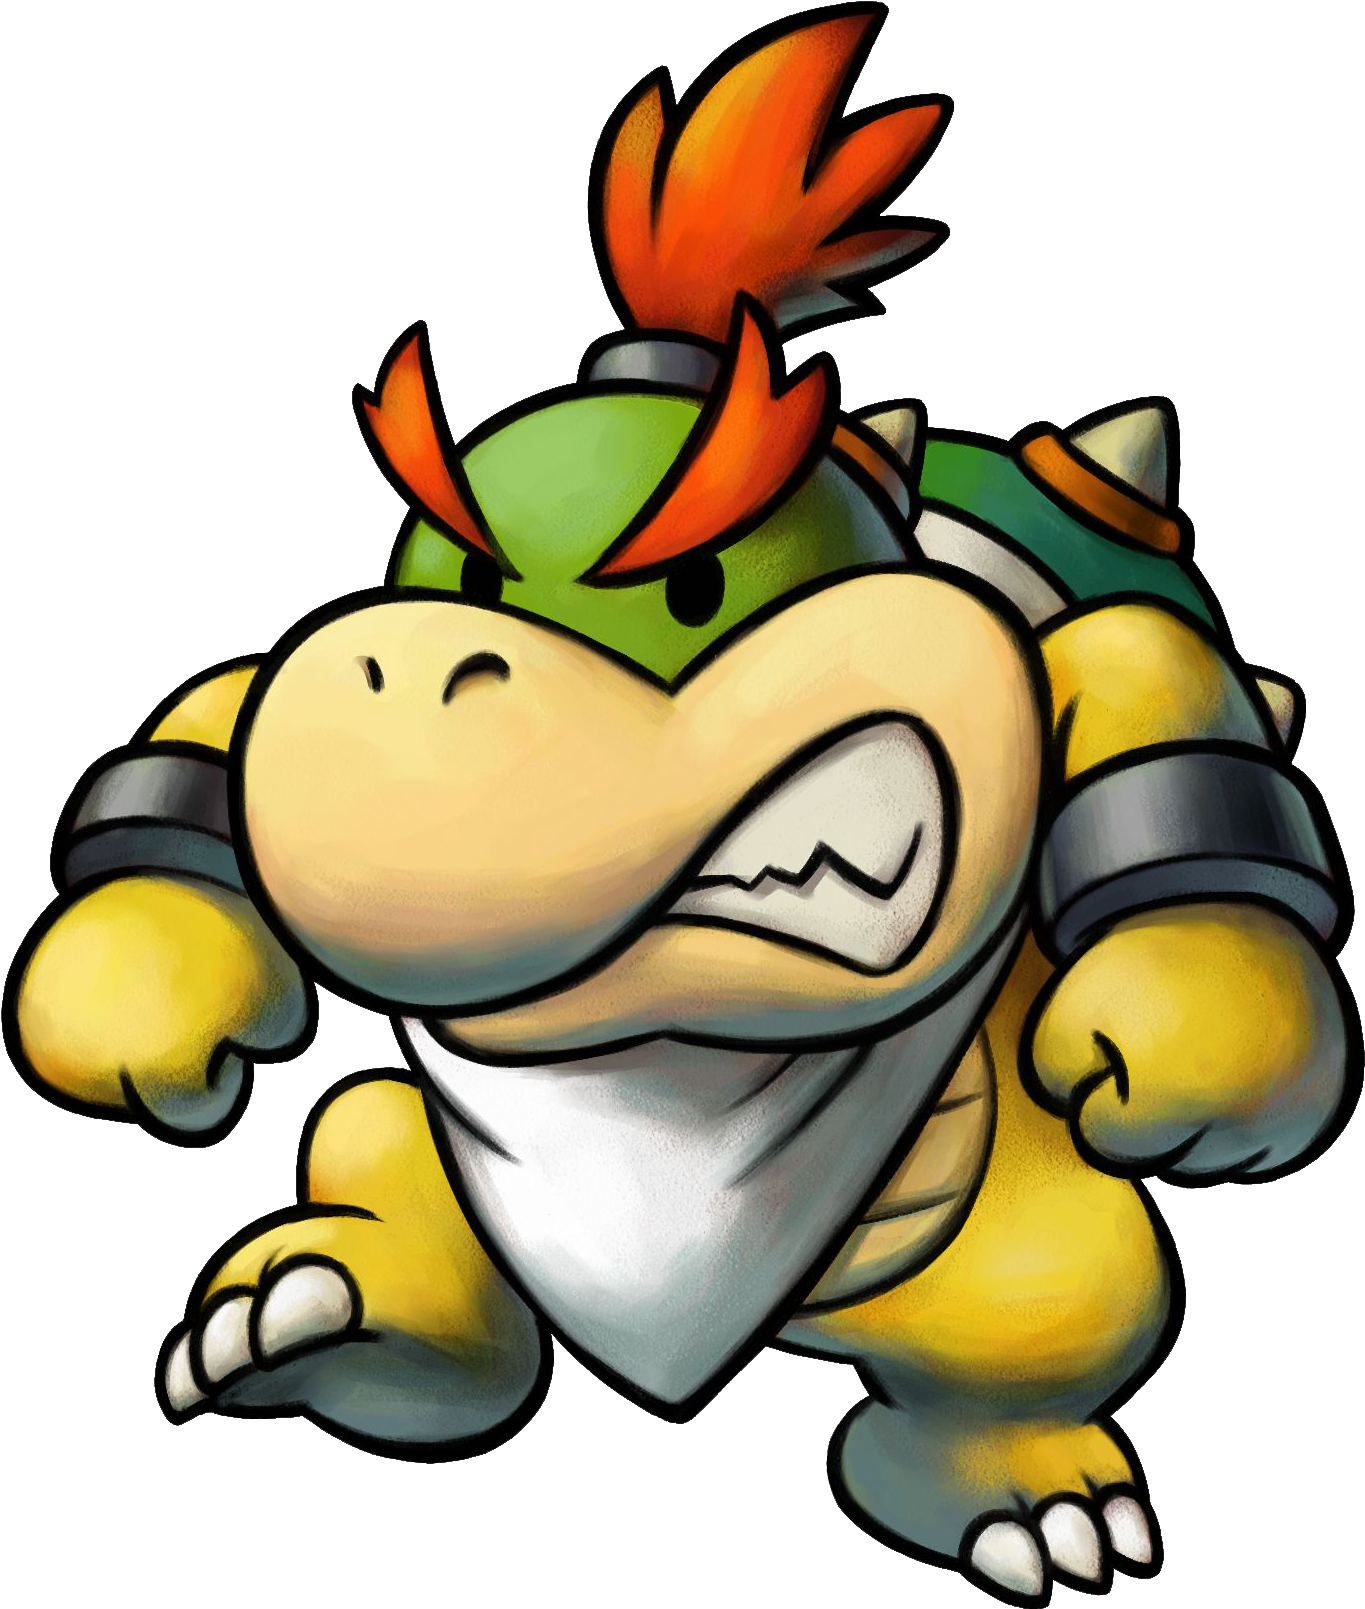 This - Super Mario Baby Bowser (1376x1616)